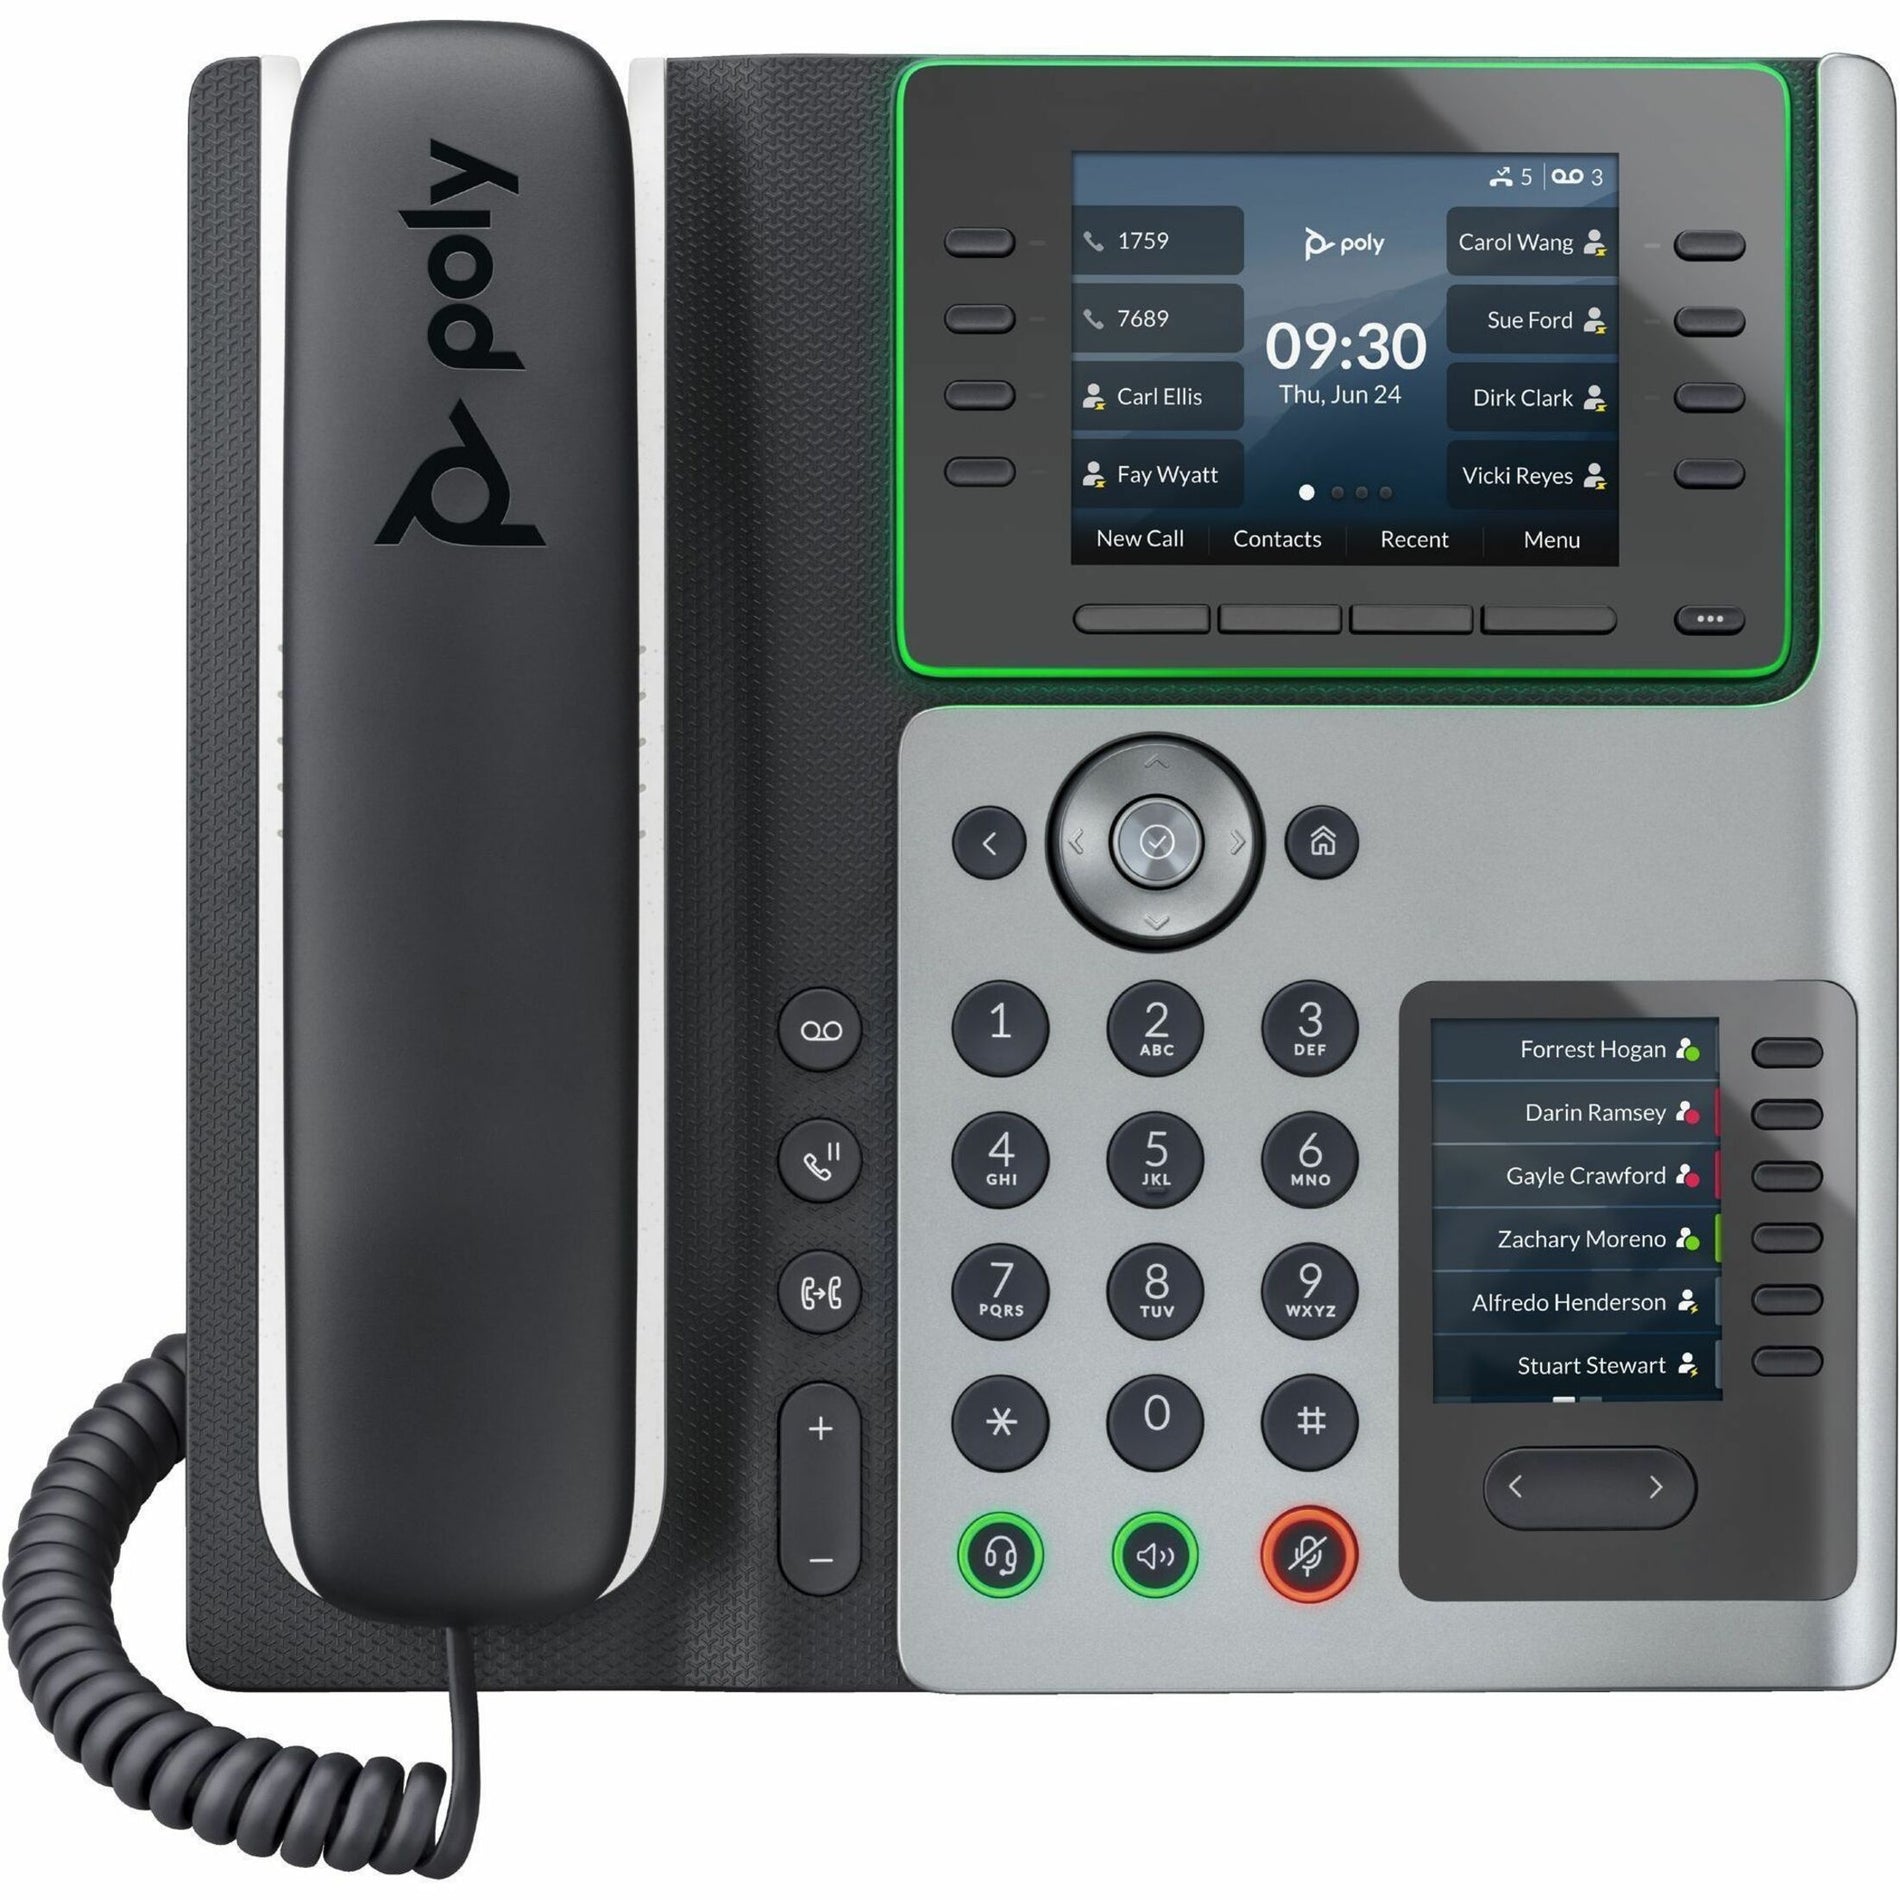 Poly Edge E450 IP Phone and PoE-Enabled with Power Supply, Corded Desktop Phone, Black